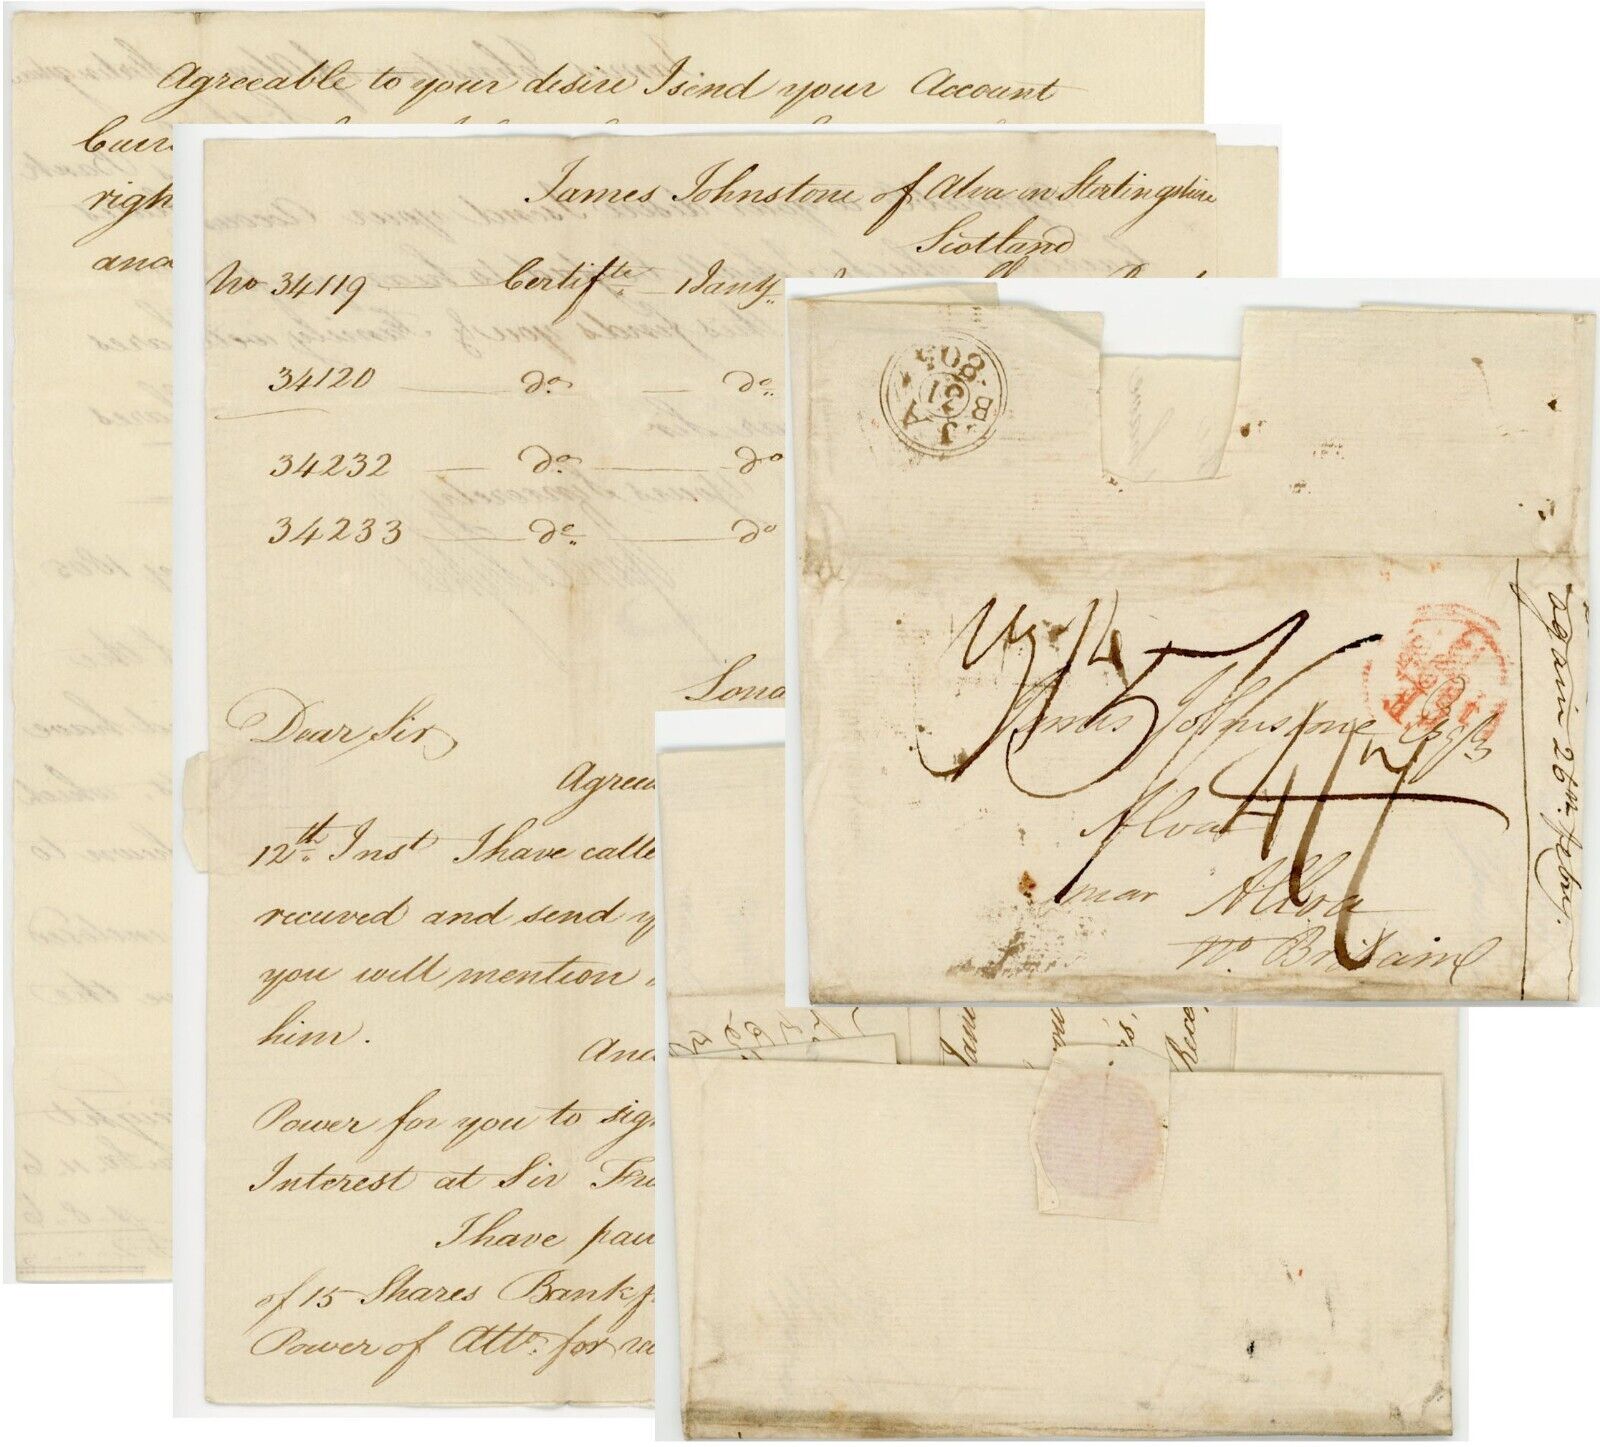 1805 LETTER to JAMES JOHNSTONE ALLOA re BANK OF UNITED STATES SHARES + INTEREST